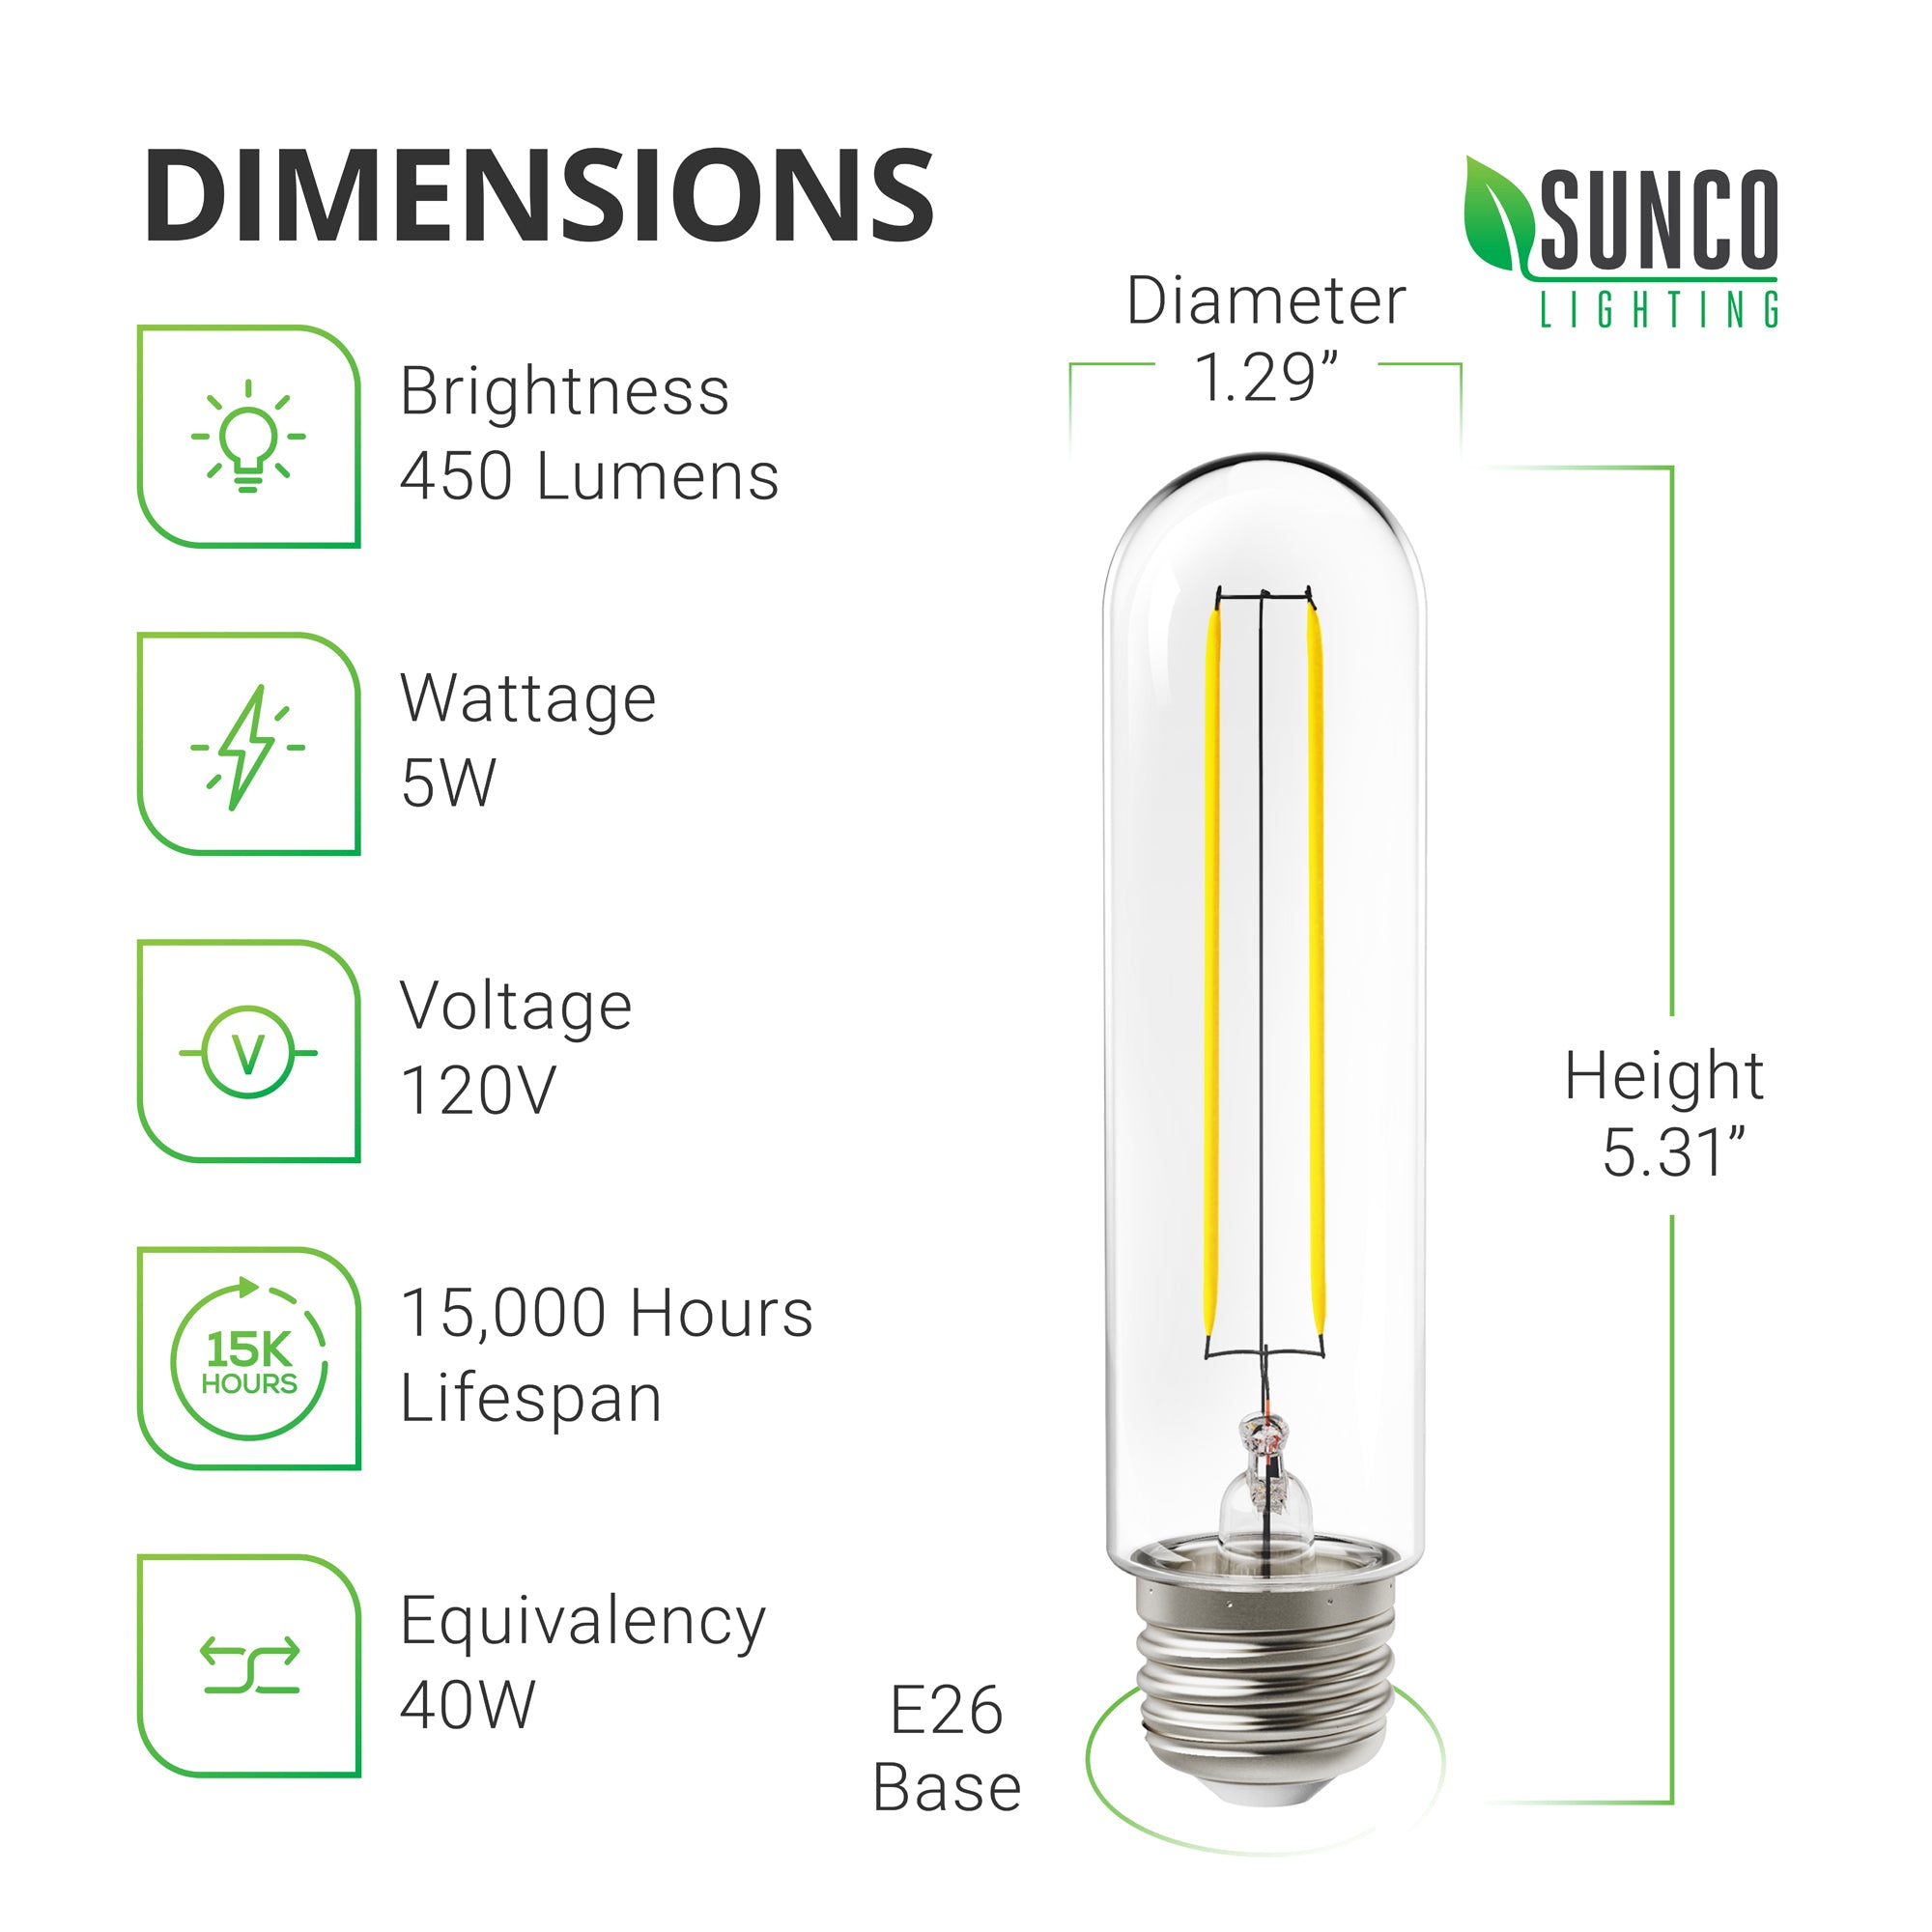 Dimensions of the T10 LED Filament Bulb with Dusk to Dawn technology. Diameter: 1.29-inches. Height: 5.31-inches. Other tech specs include Base Type: E26 base, brightness: 450 lumens, Wattage: 5W, Equivalency: 40W, Voltage: 120V, Lifespan: 15,000 lifetime hours. This tubular LED bulb has a clear, glass housing with the LED filament inside. This retro styled light bulb works well in pendants, wall sconces, modern dining room light fixtures, and string lights.